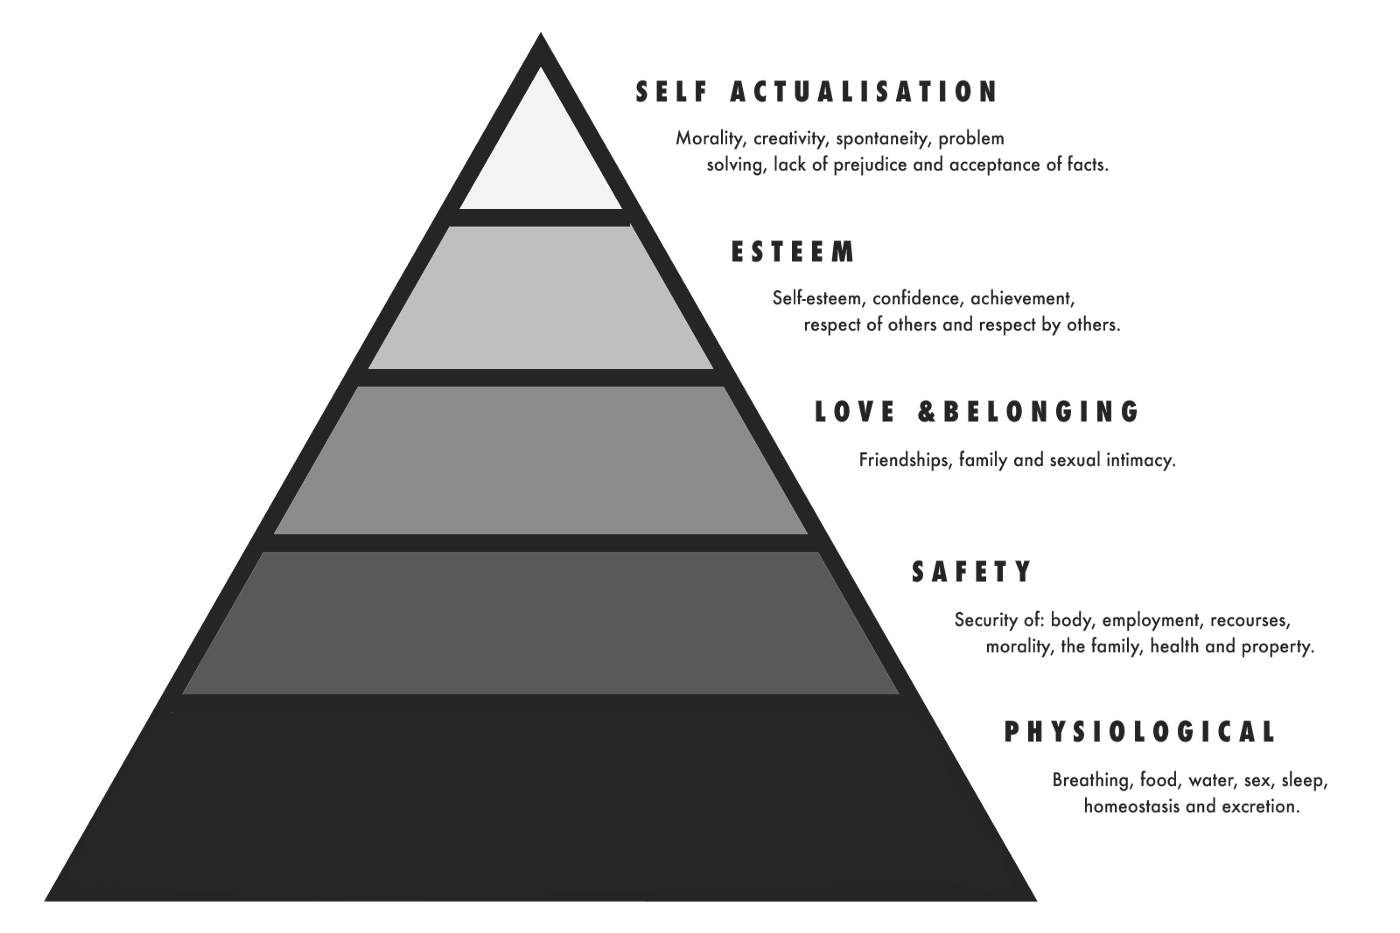 5 Step Need Hierarchy by Maslow. 1: Psychological, 2: Safety, 3: Love & Belonging, 4: Esteem, 5: Self-actualisation.